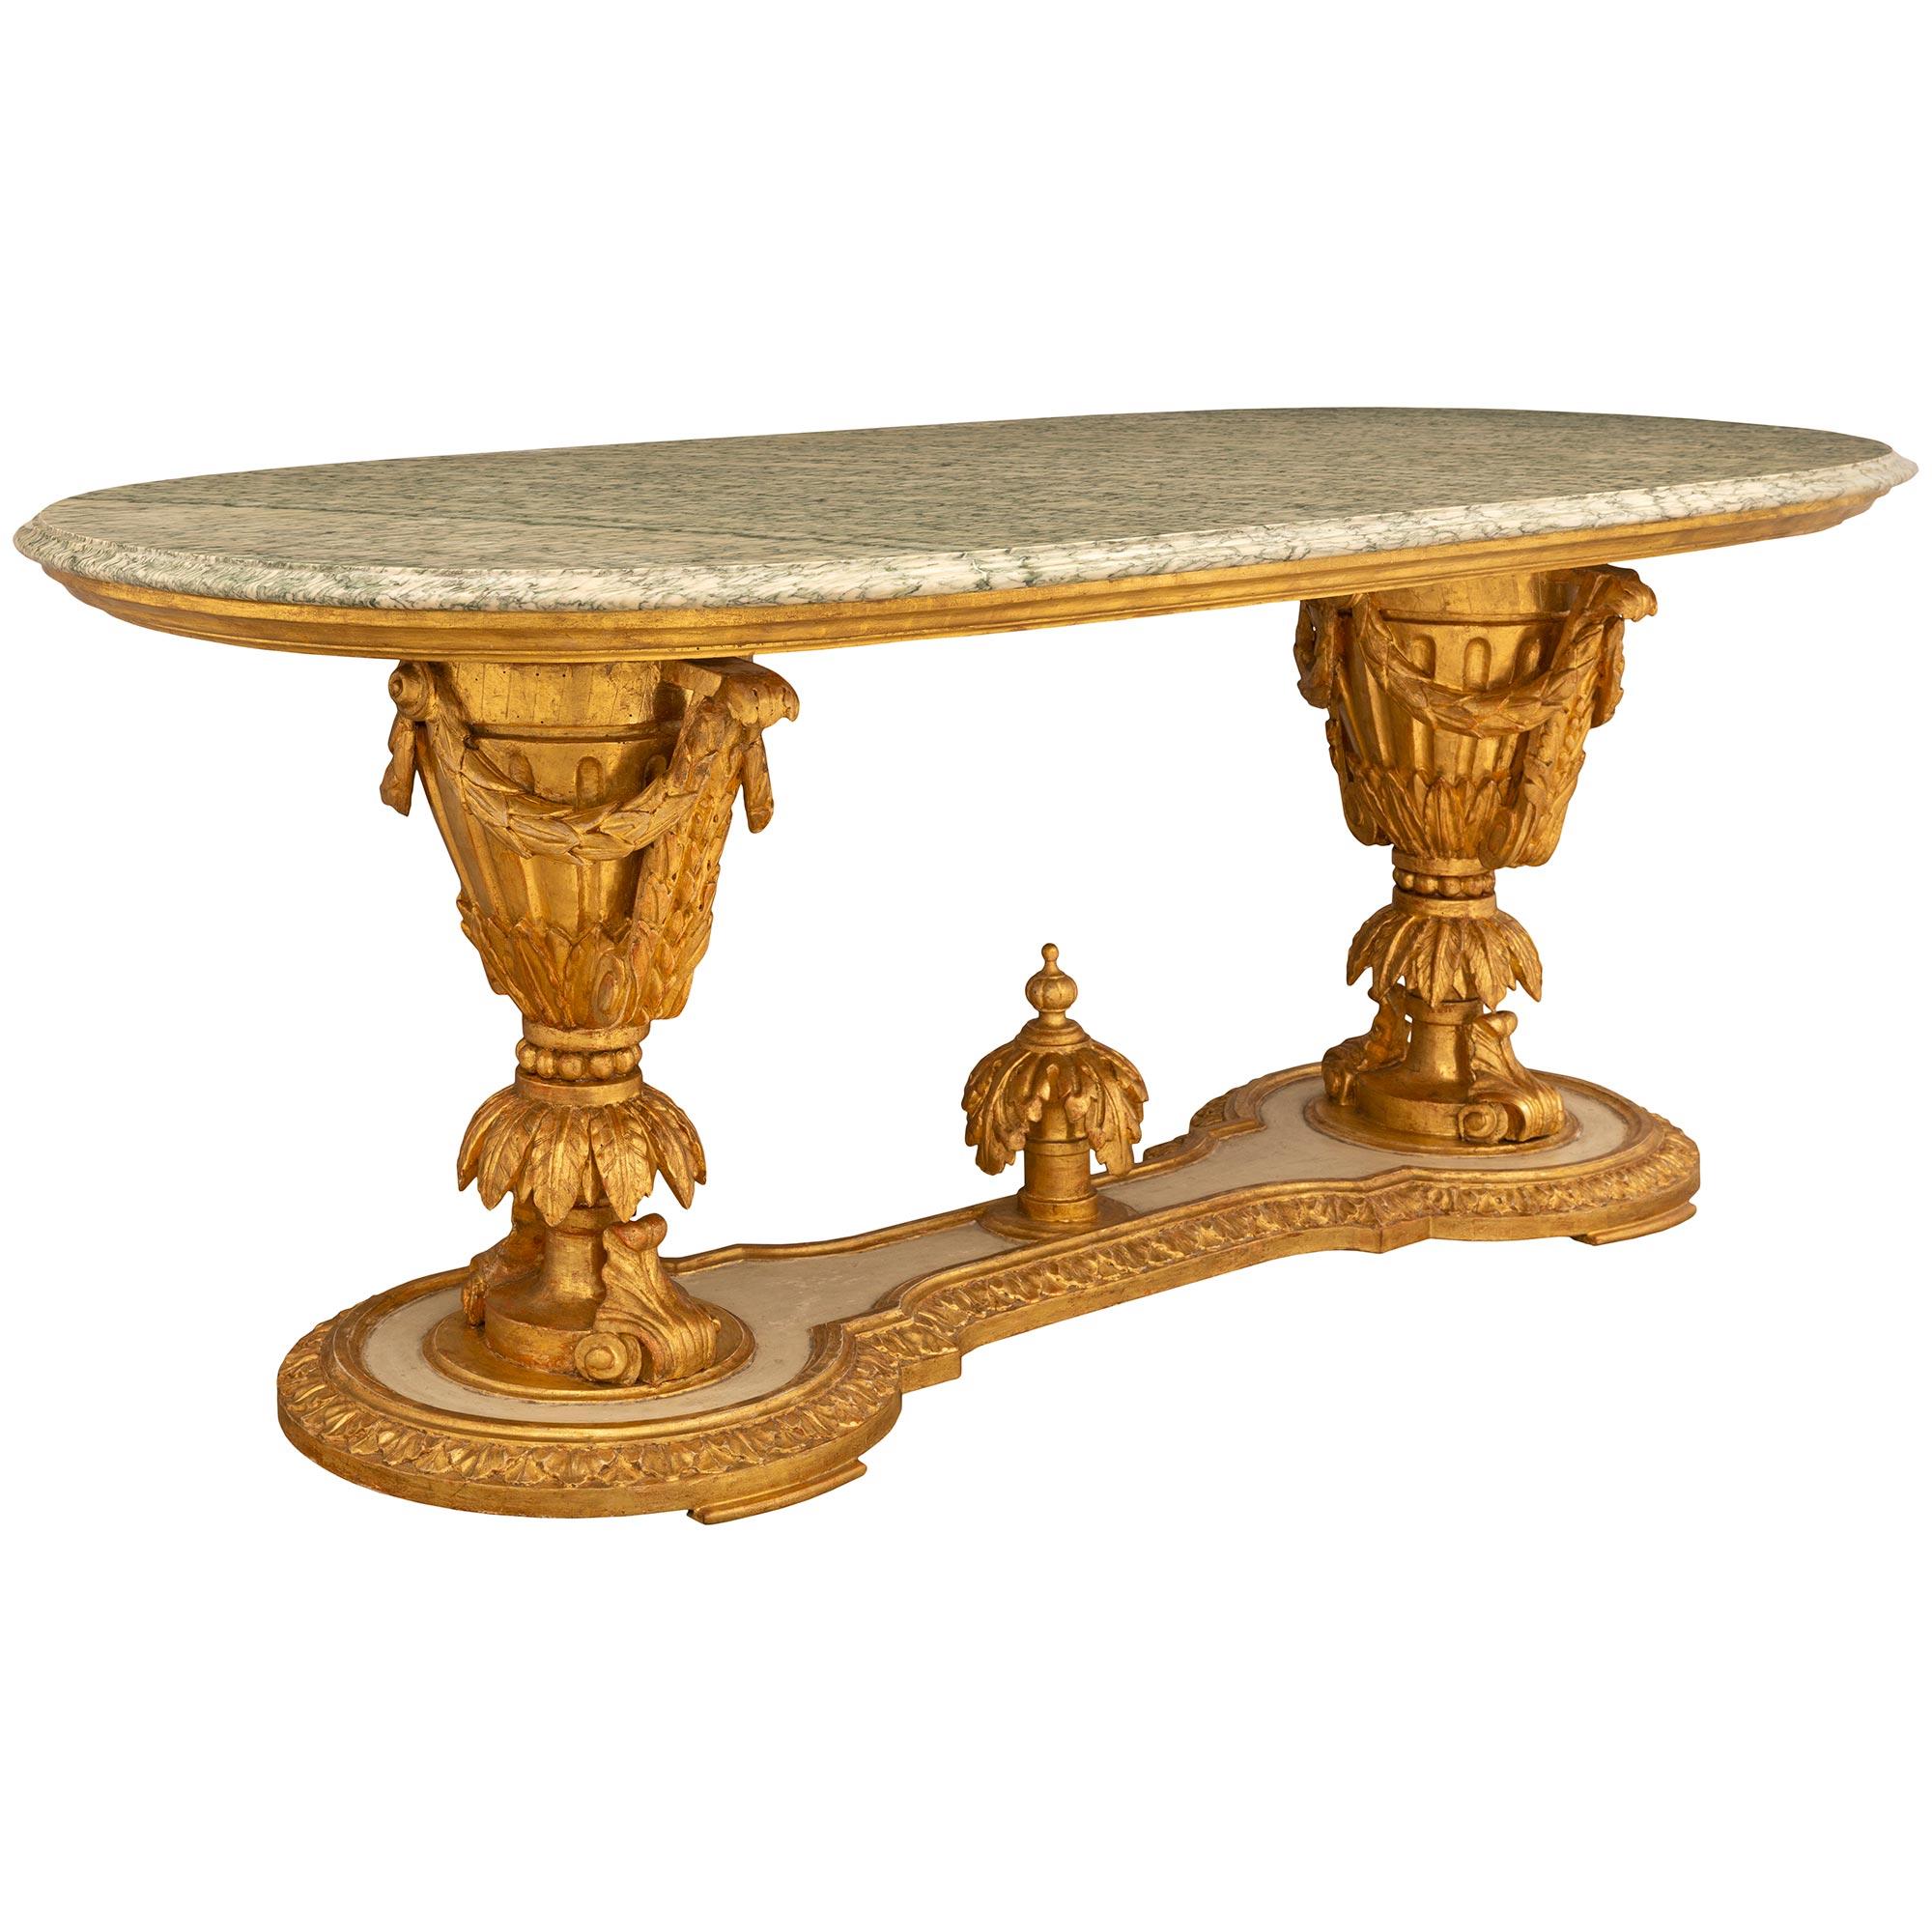 A stunning and very unique Italian 19th century Louis XVI st. patinated, giltwood and Vert Campan center table. The oblong center table is raised by the most decorative base with fine mottled feet below the patinated off white bottom tier with a